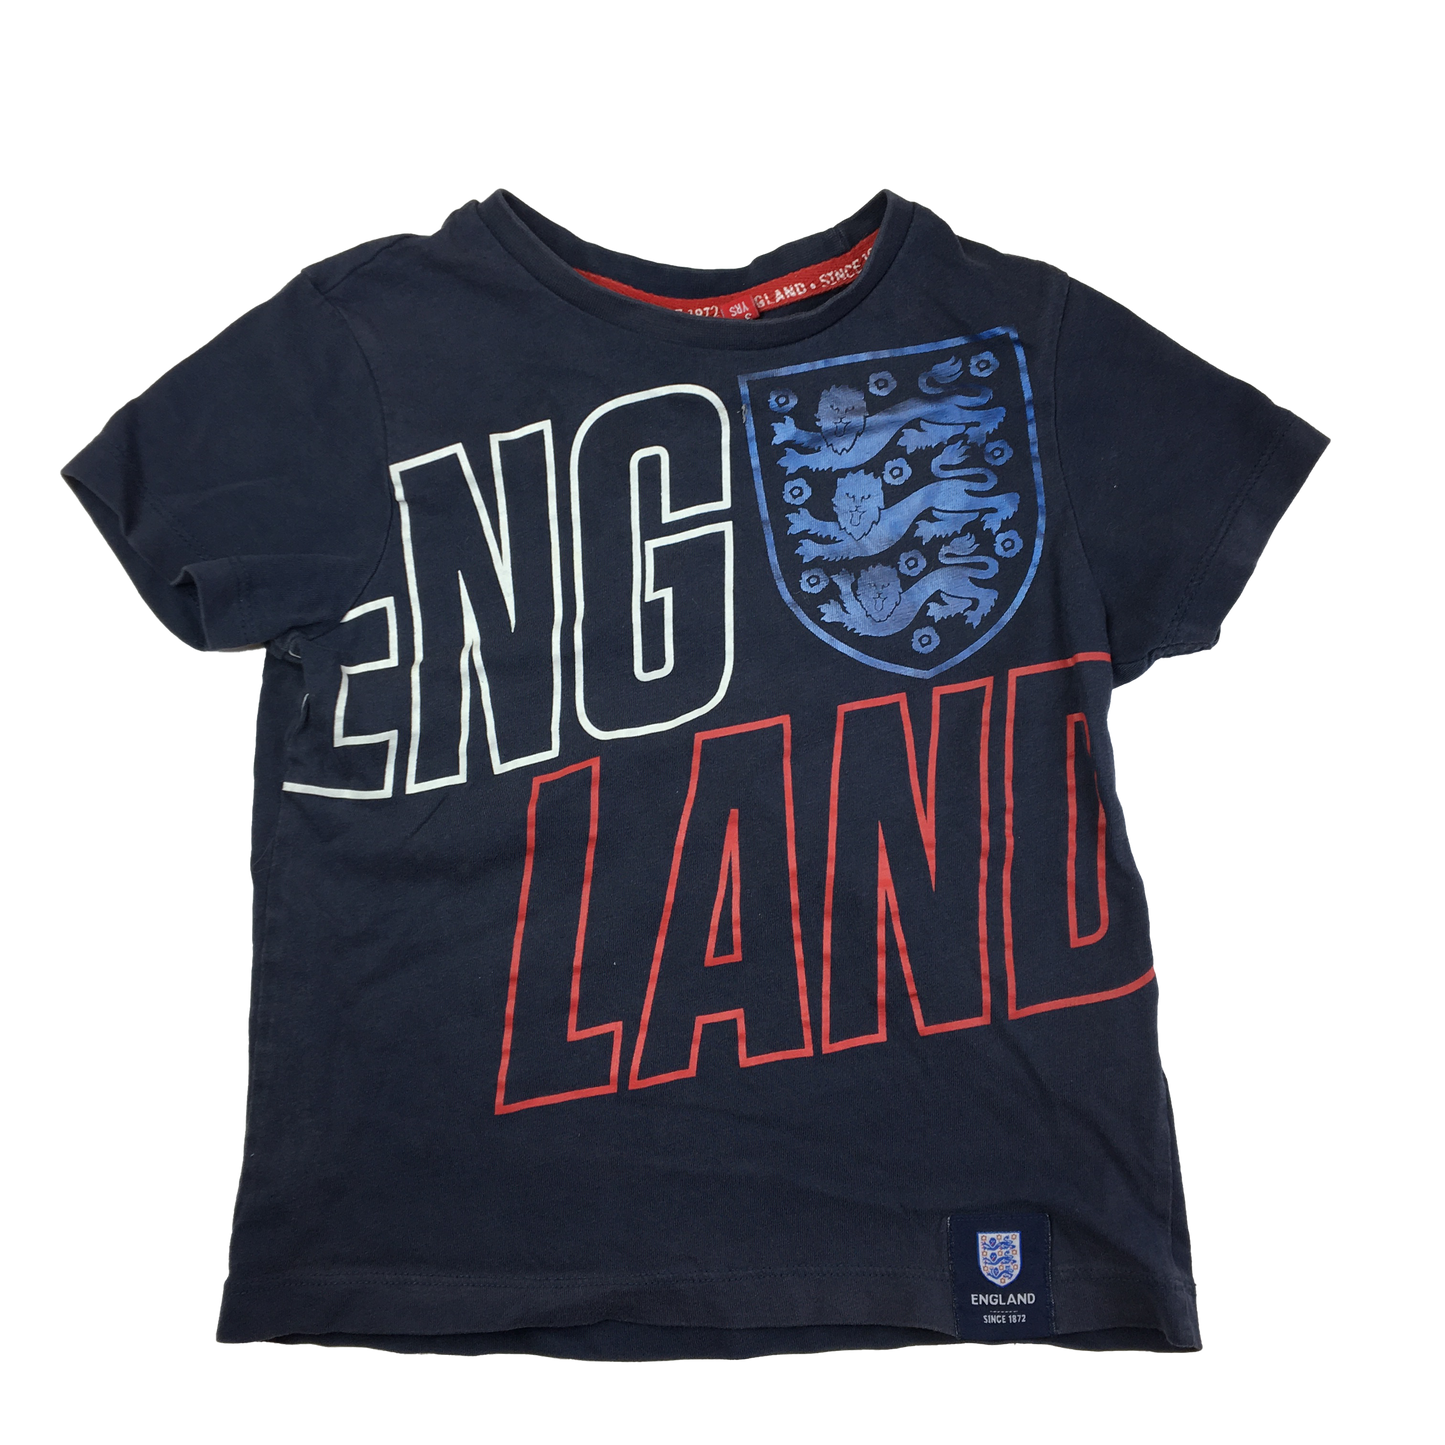 England Navy T-Shirt with "England" Logo 3-4T